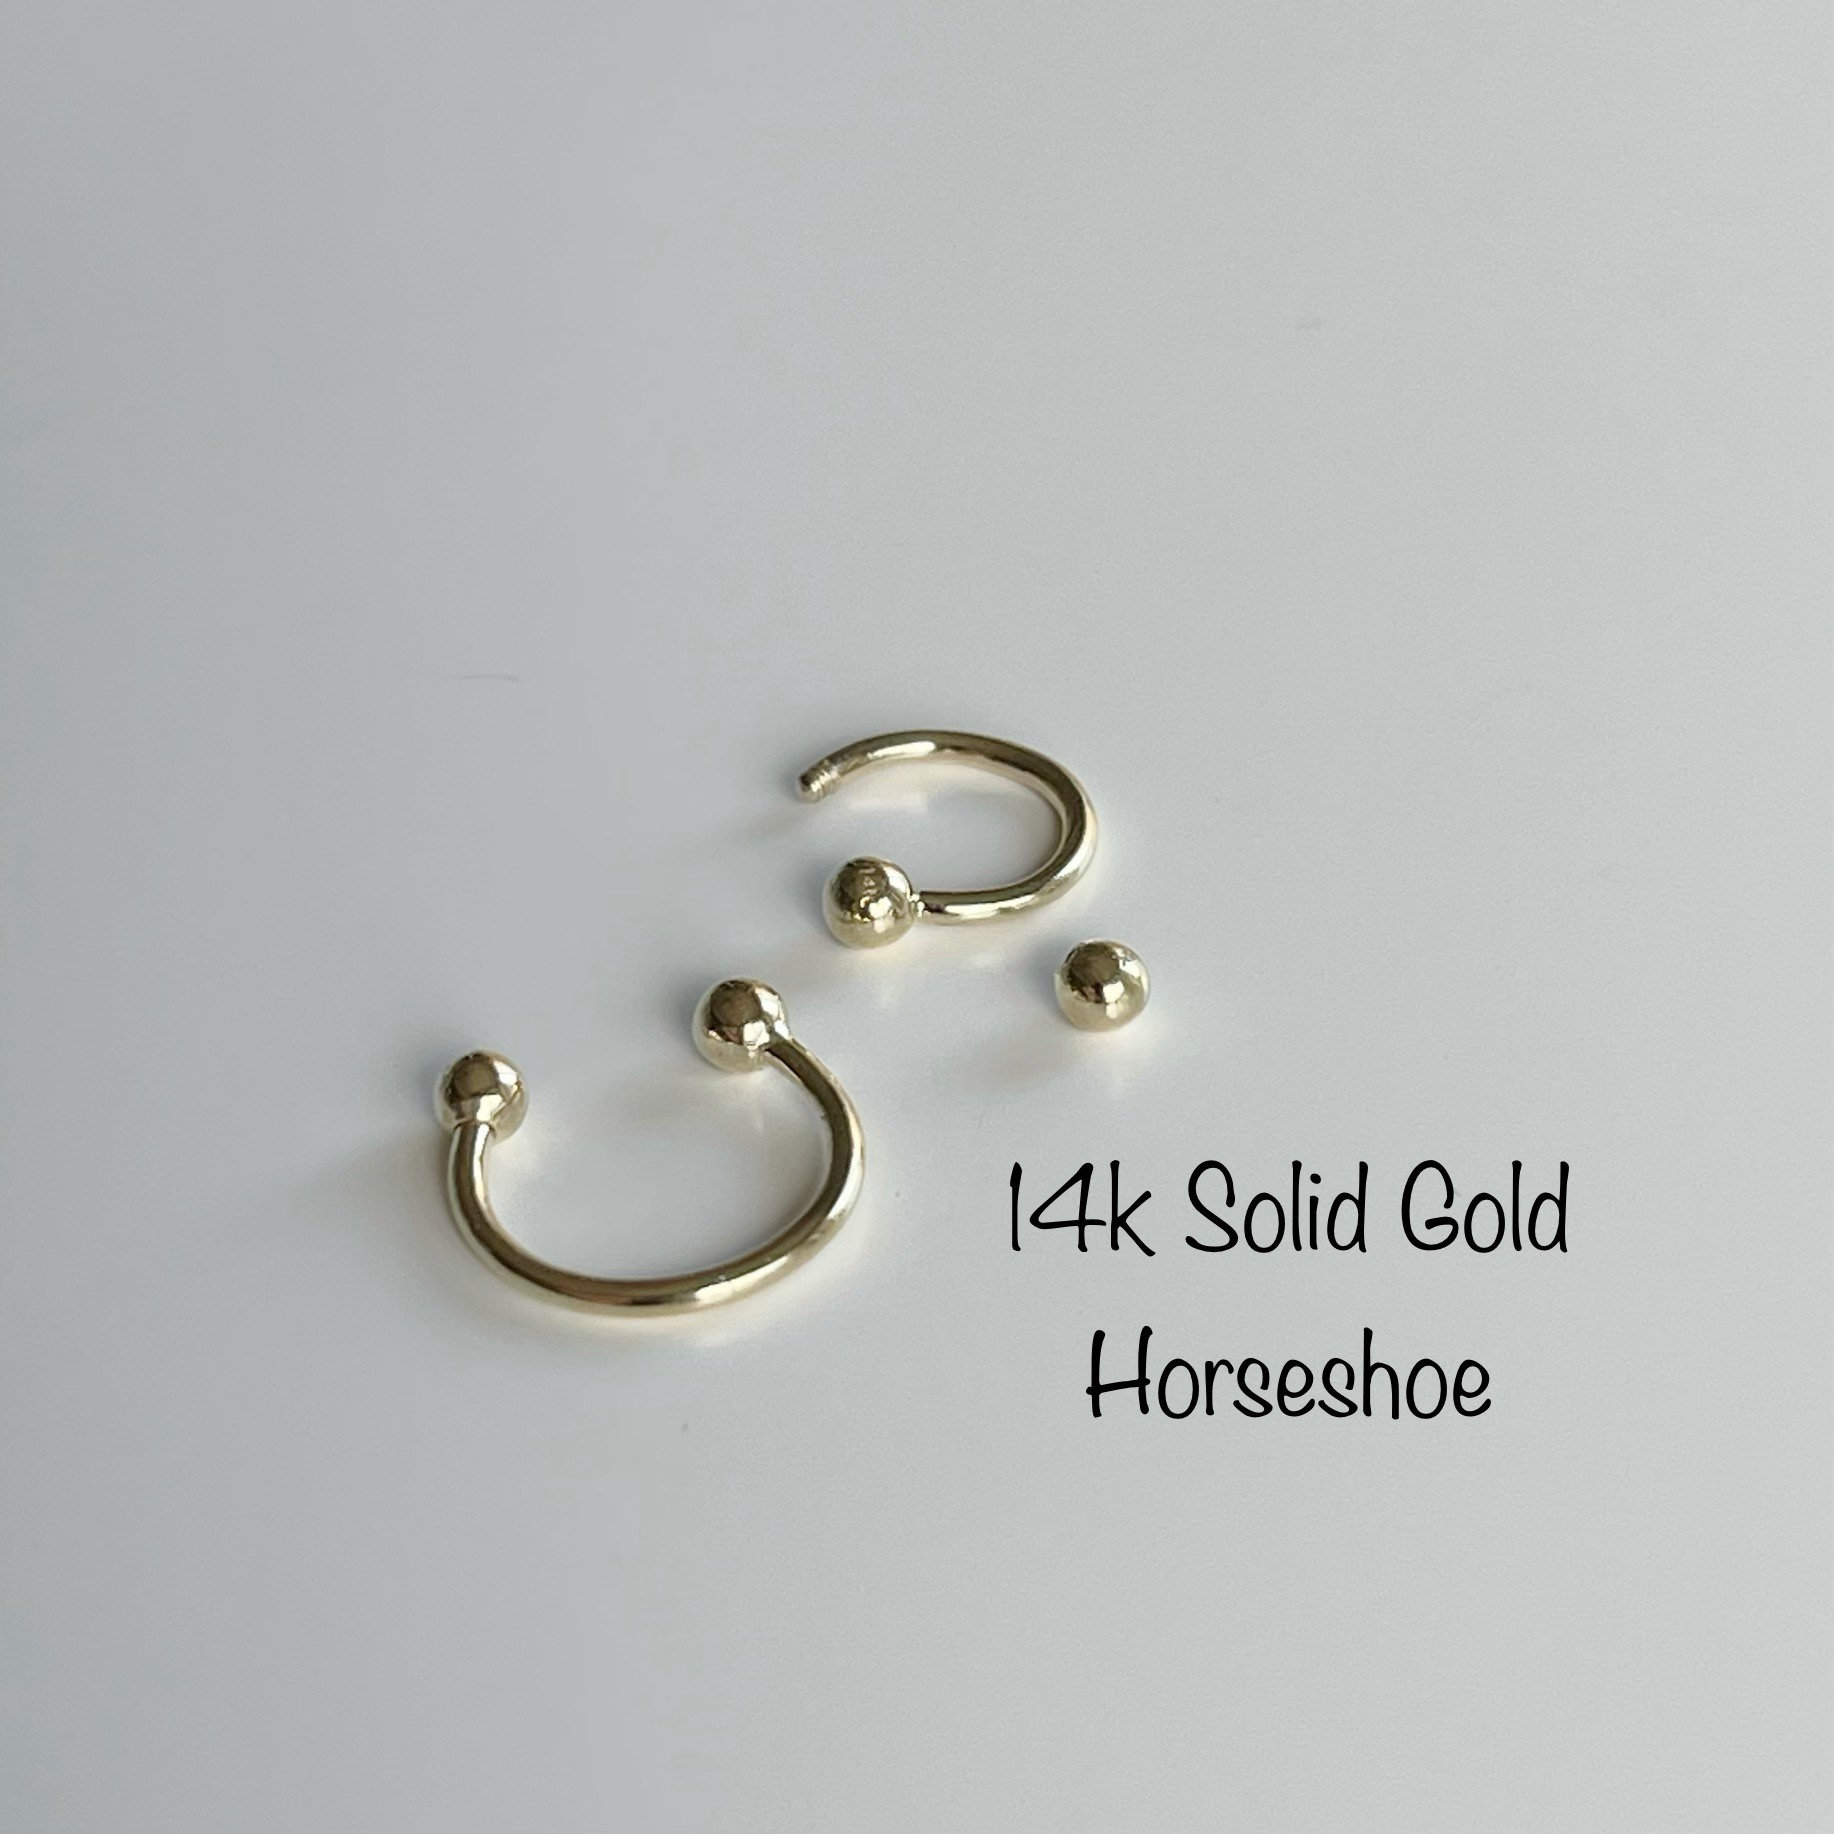 14K Solid GOLD Horseshoe Circular Barbell Rings NOSE EAR NIPPLE Piercing Jewelry